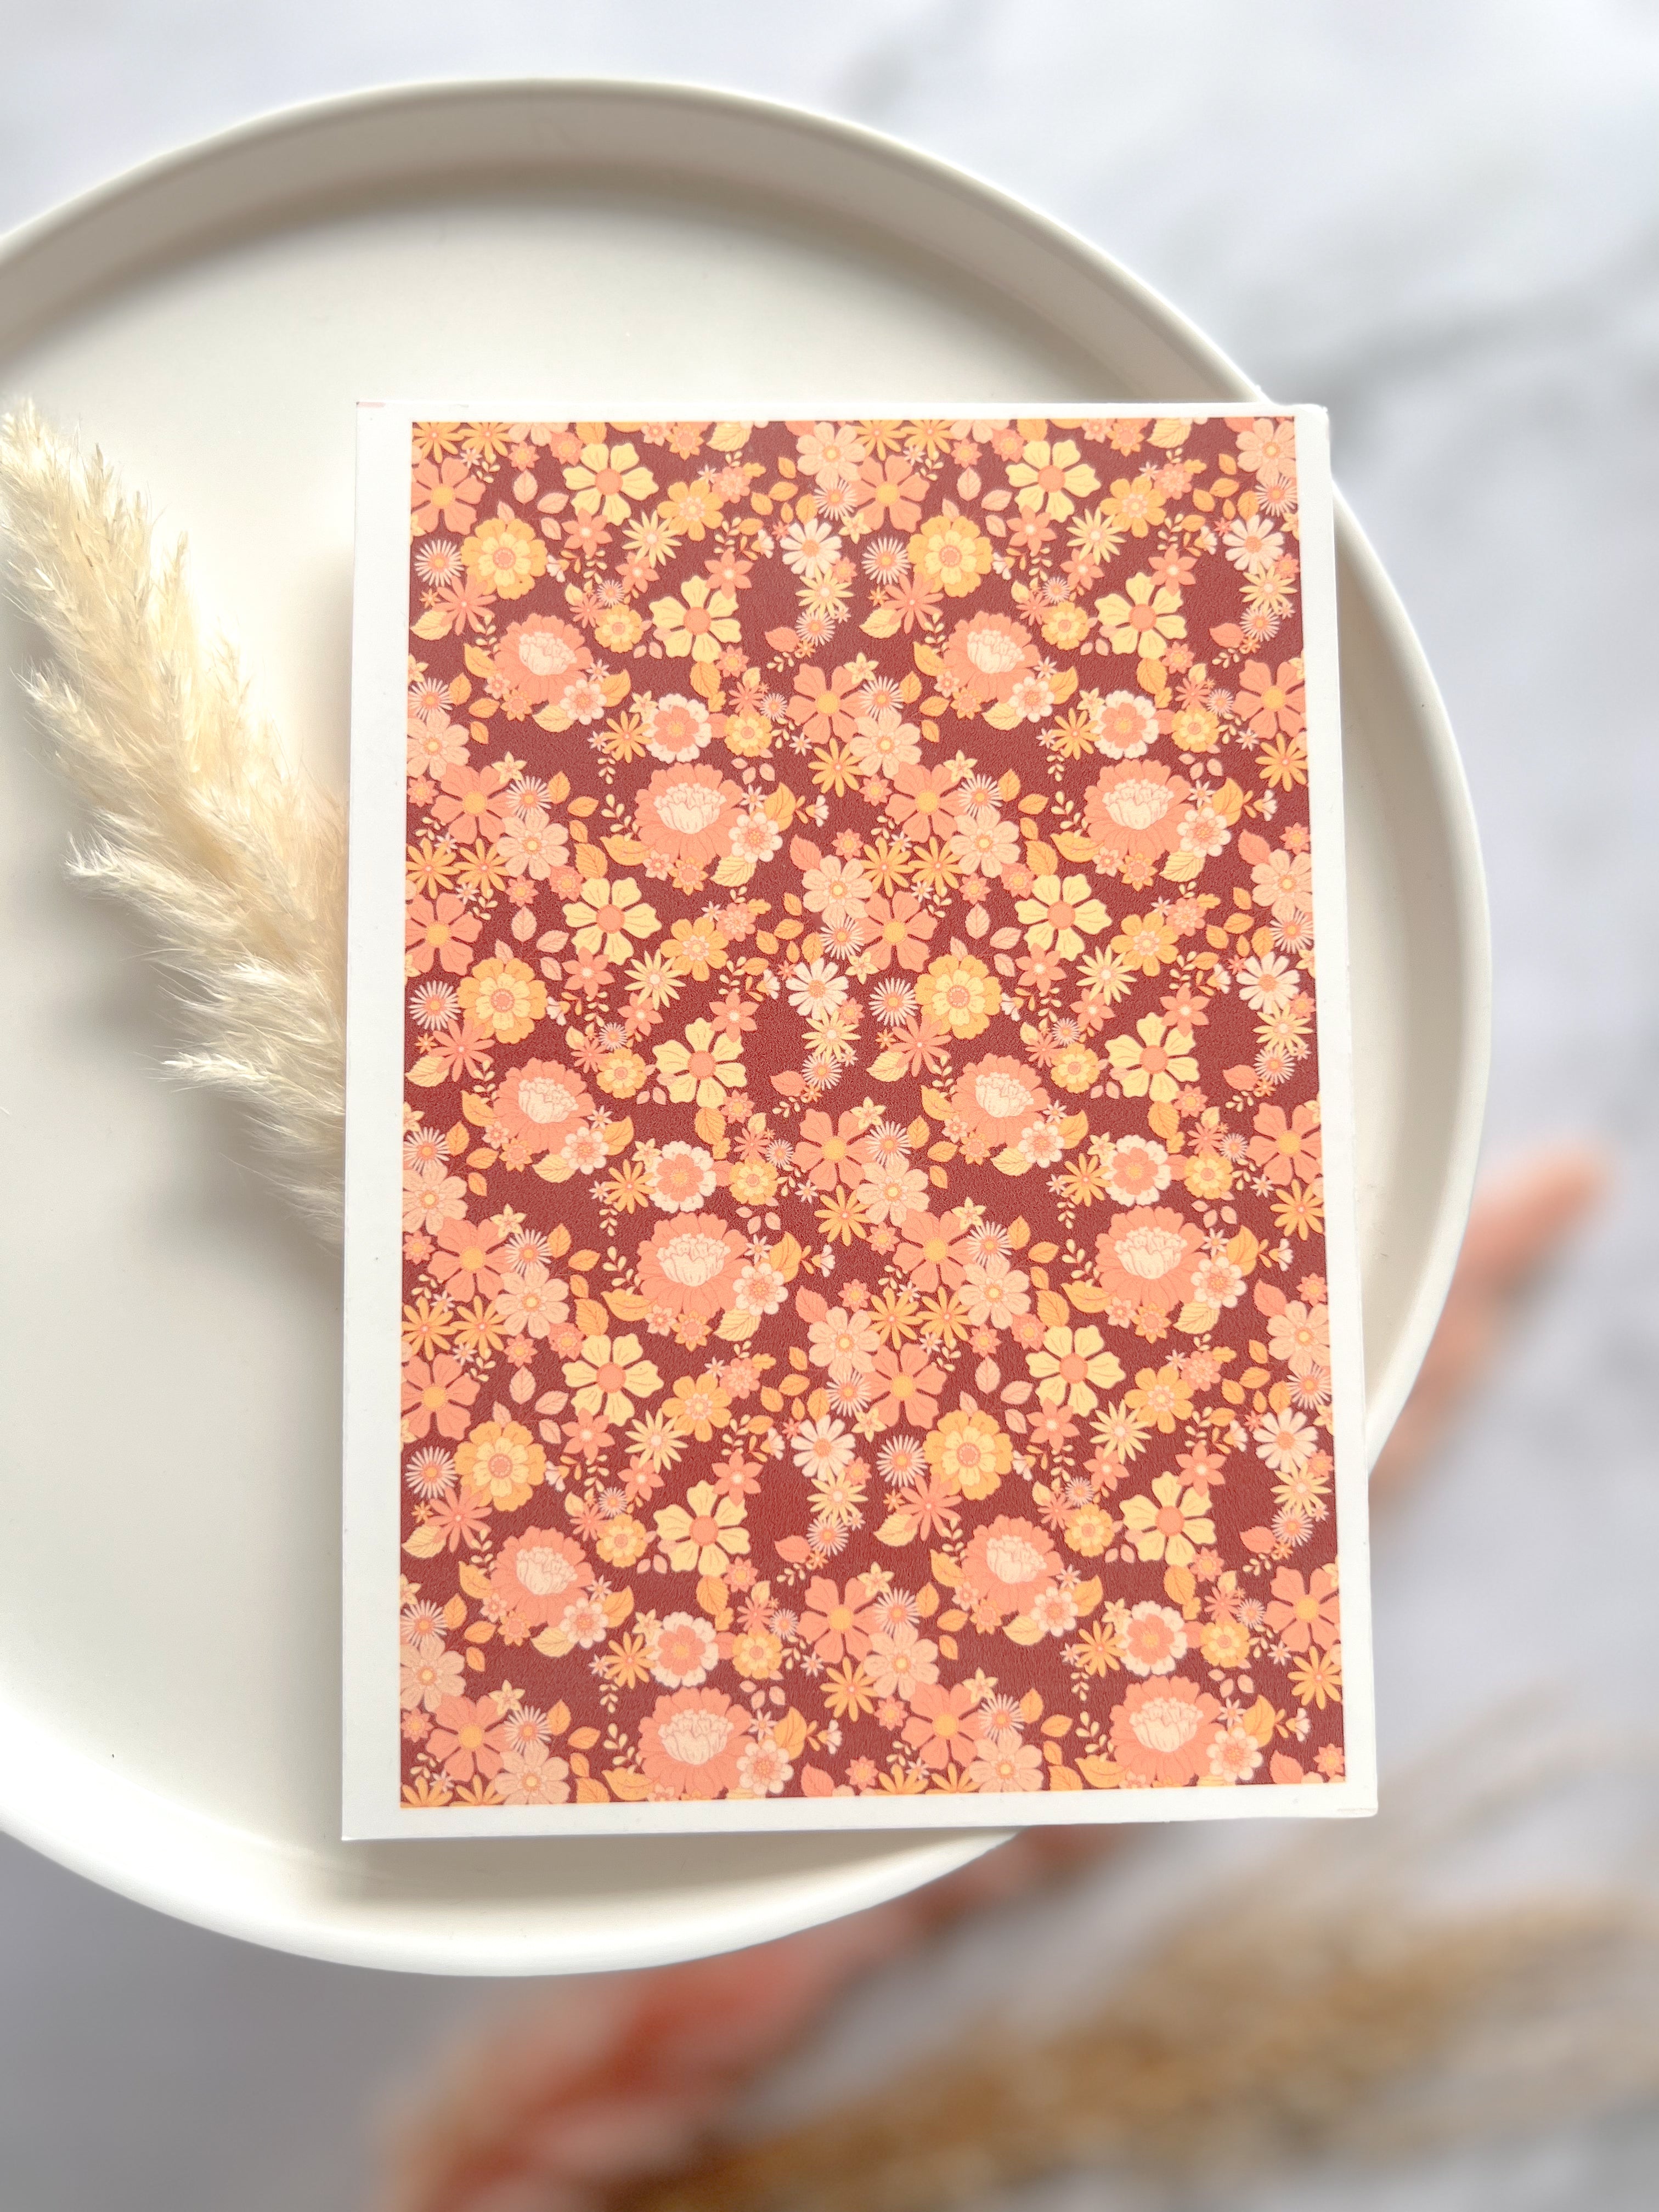 1 Sheet, Approx 13x90cm, Floral Print Water Decal Image Transfer for Polymer Clay / Ceramics